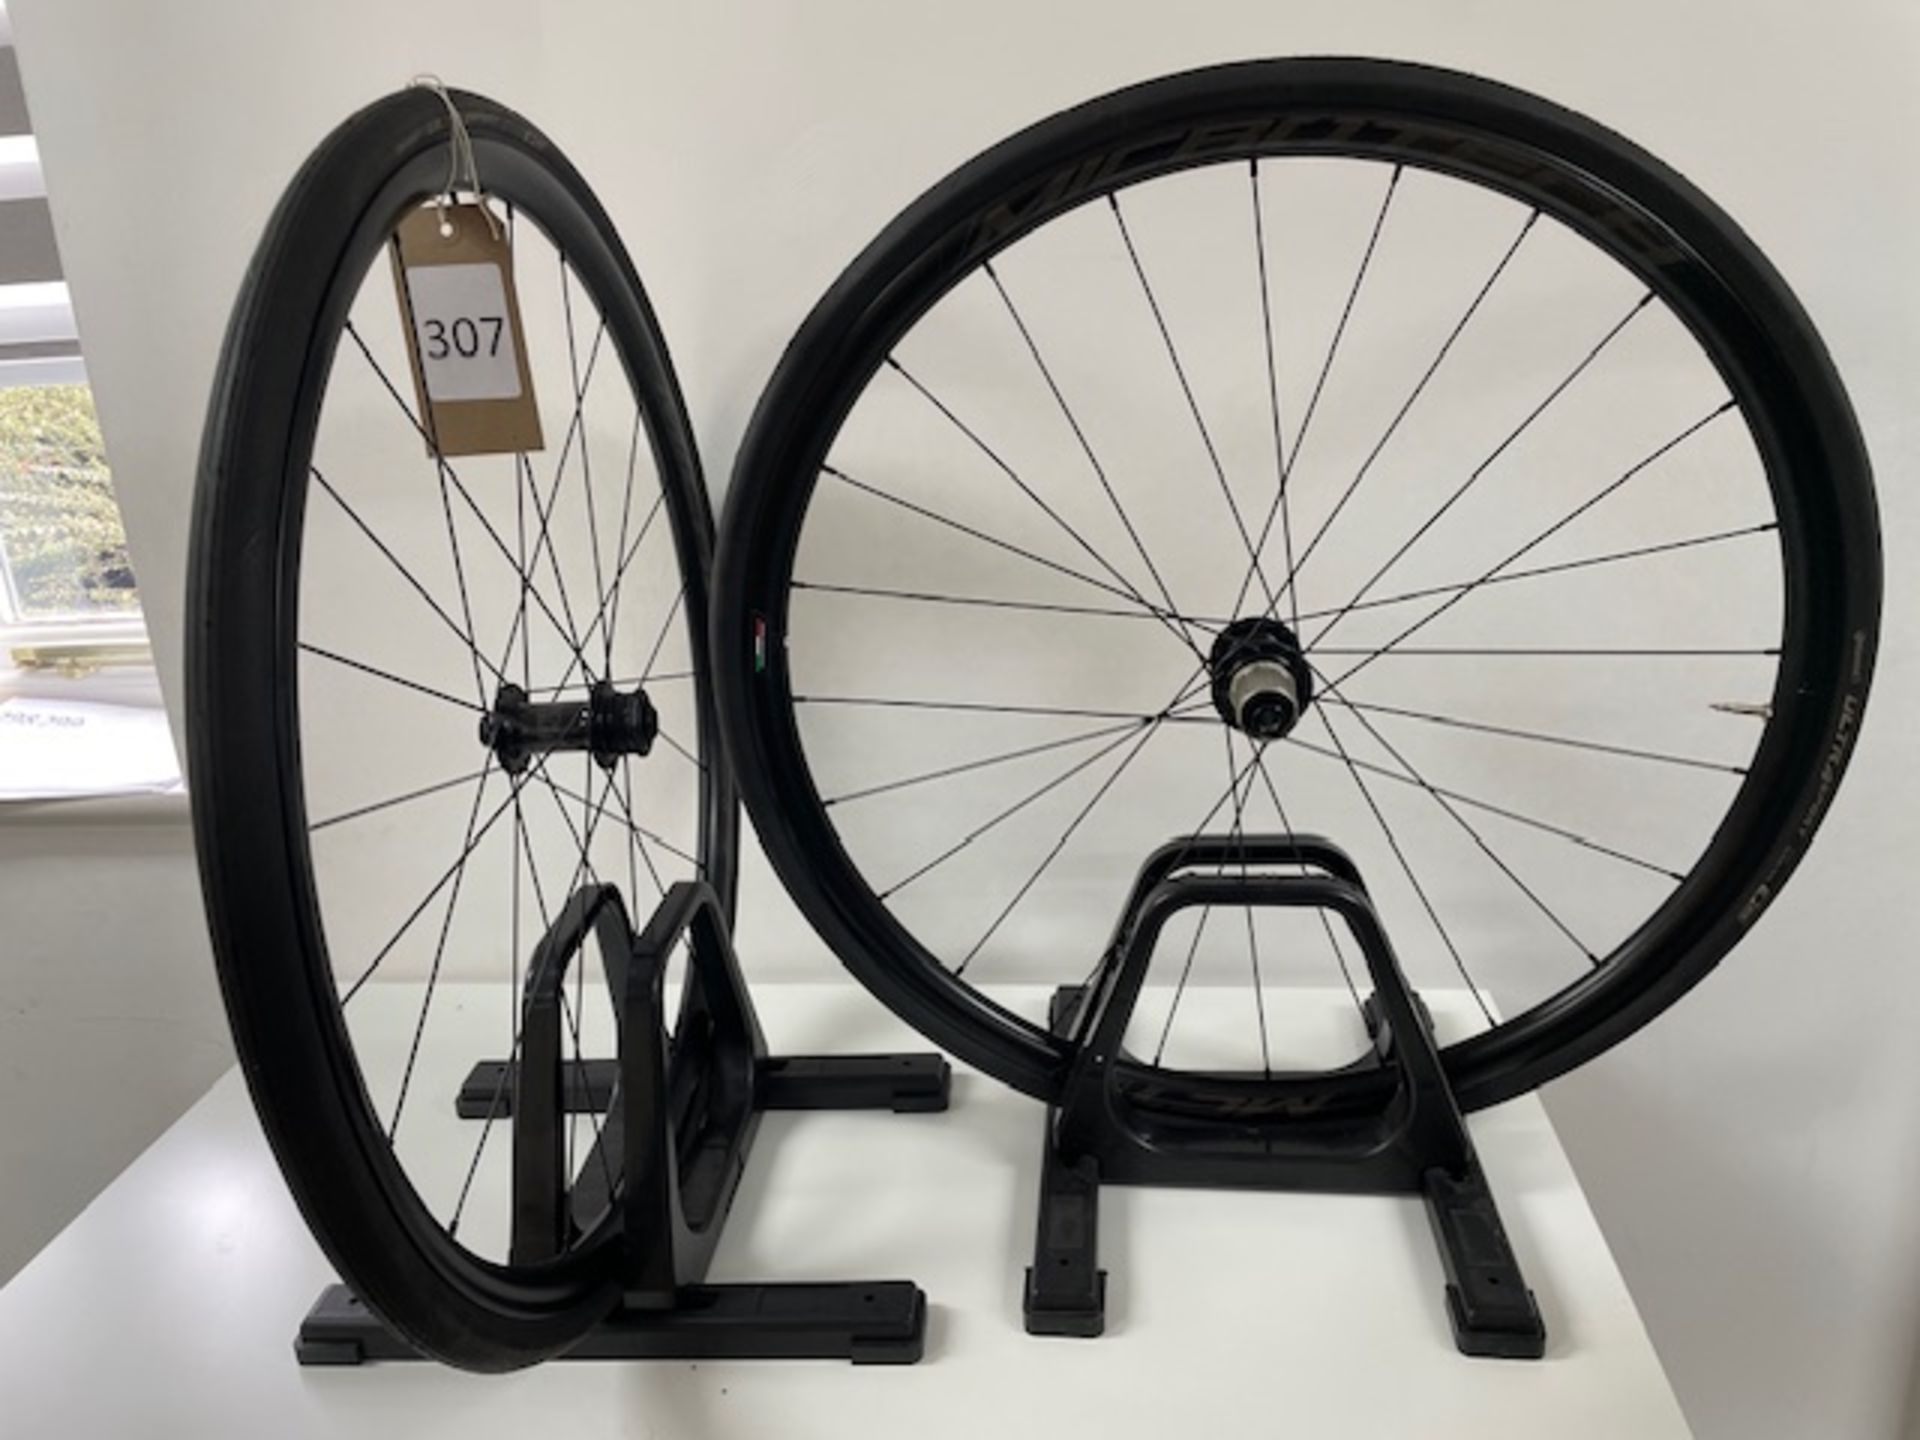 Pair Microtech Alloy Wheels, 700c with UltraSport Tyres & Shimano Freehub (Location: Newport